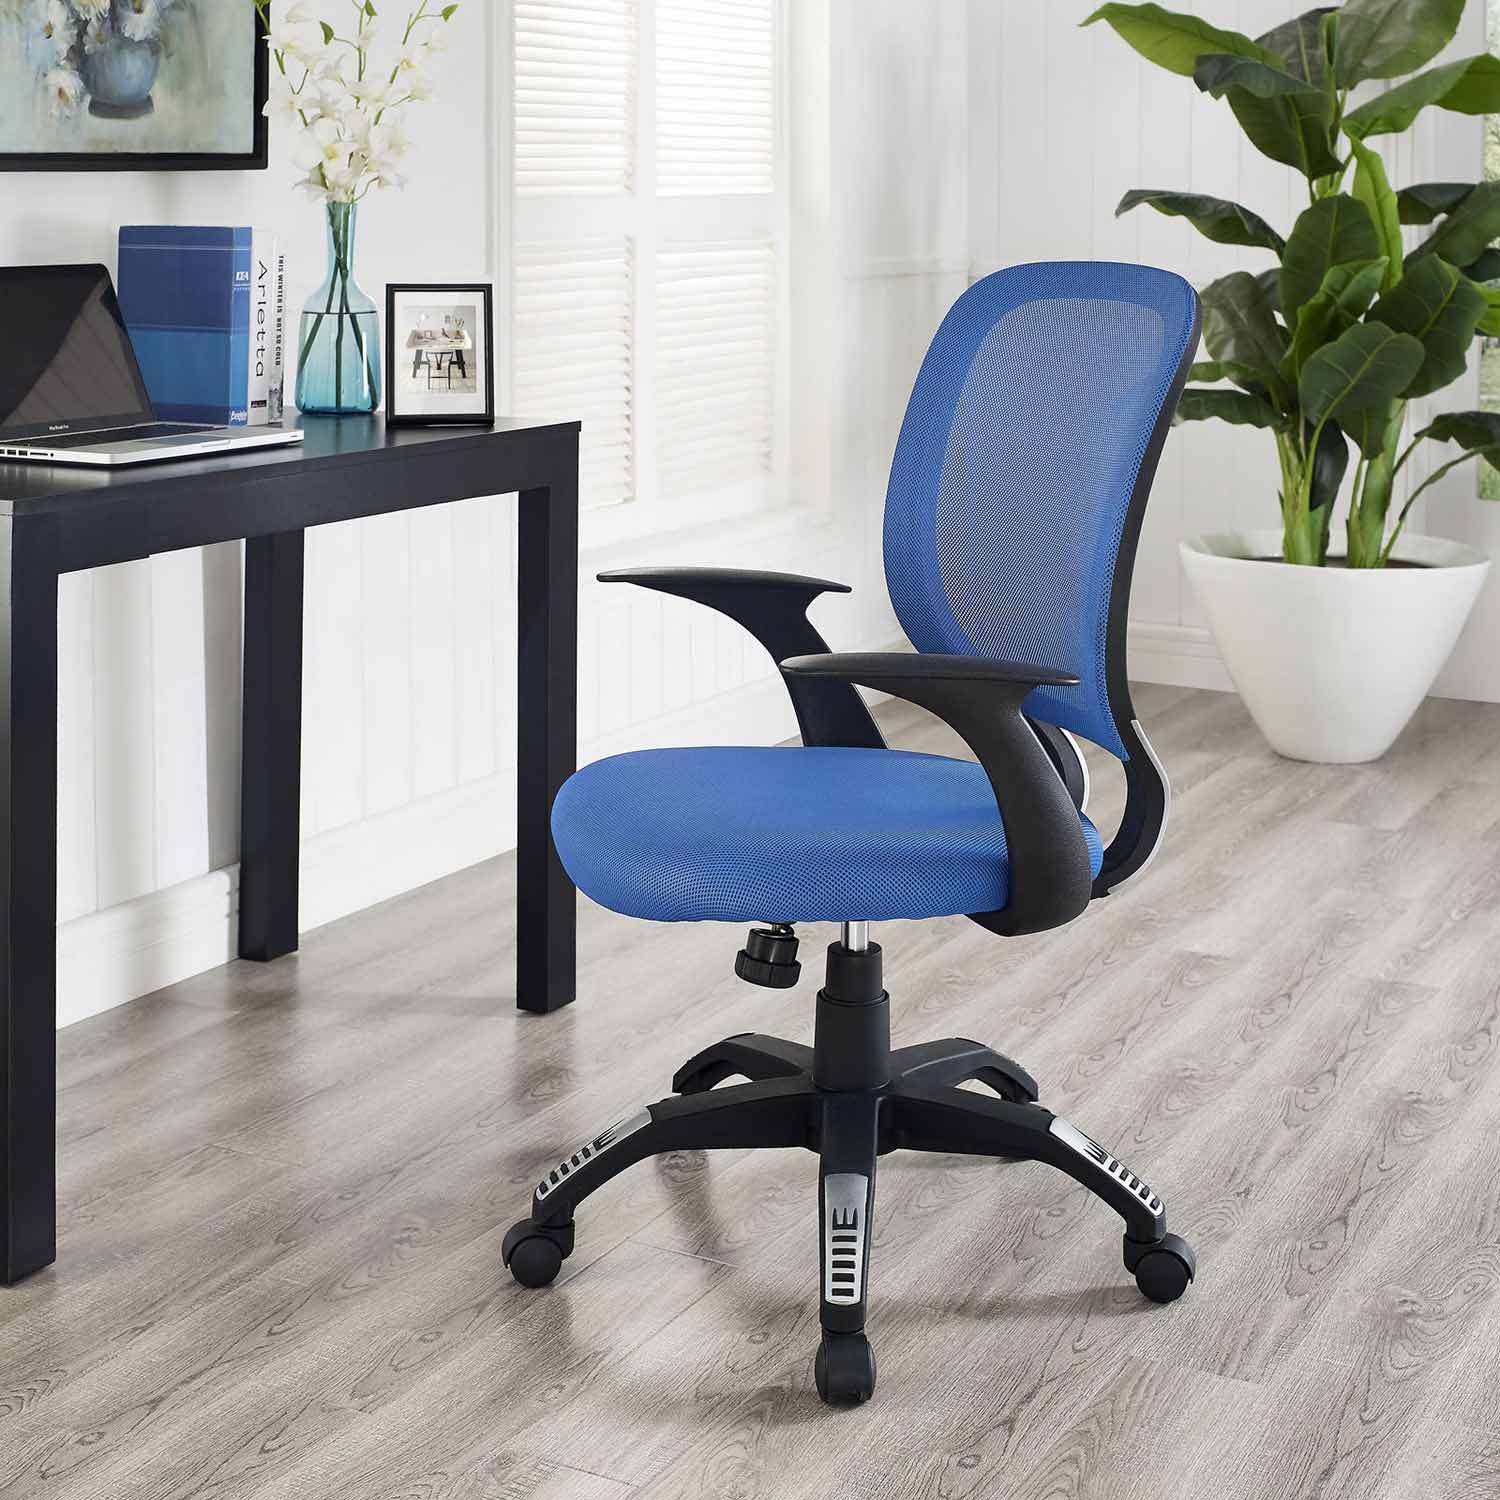 Modway Scope Office Chair - Blue